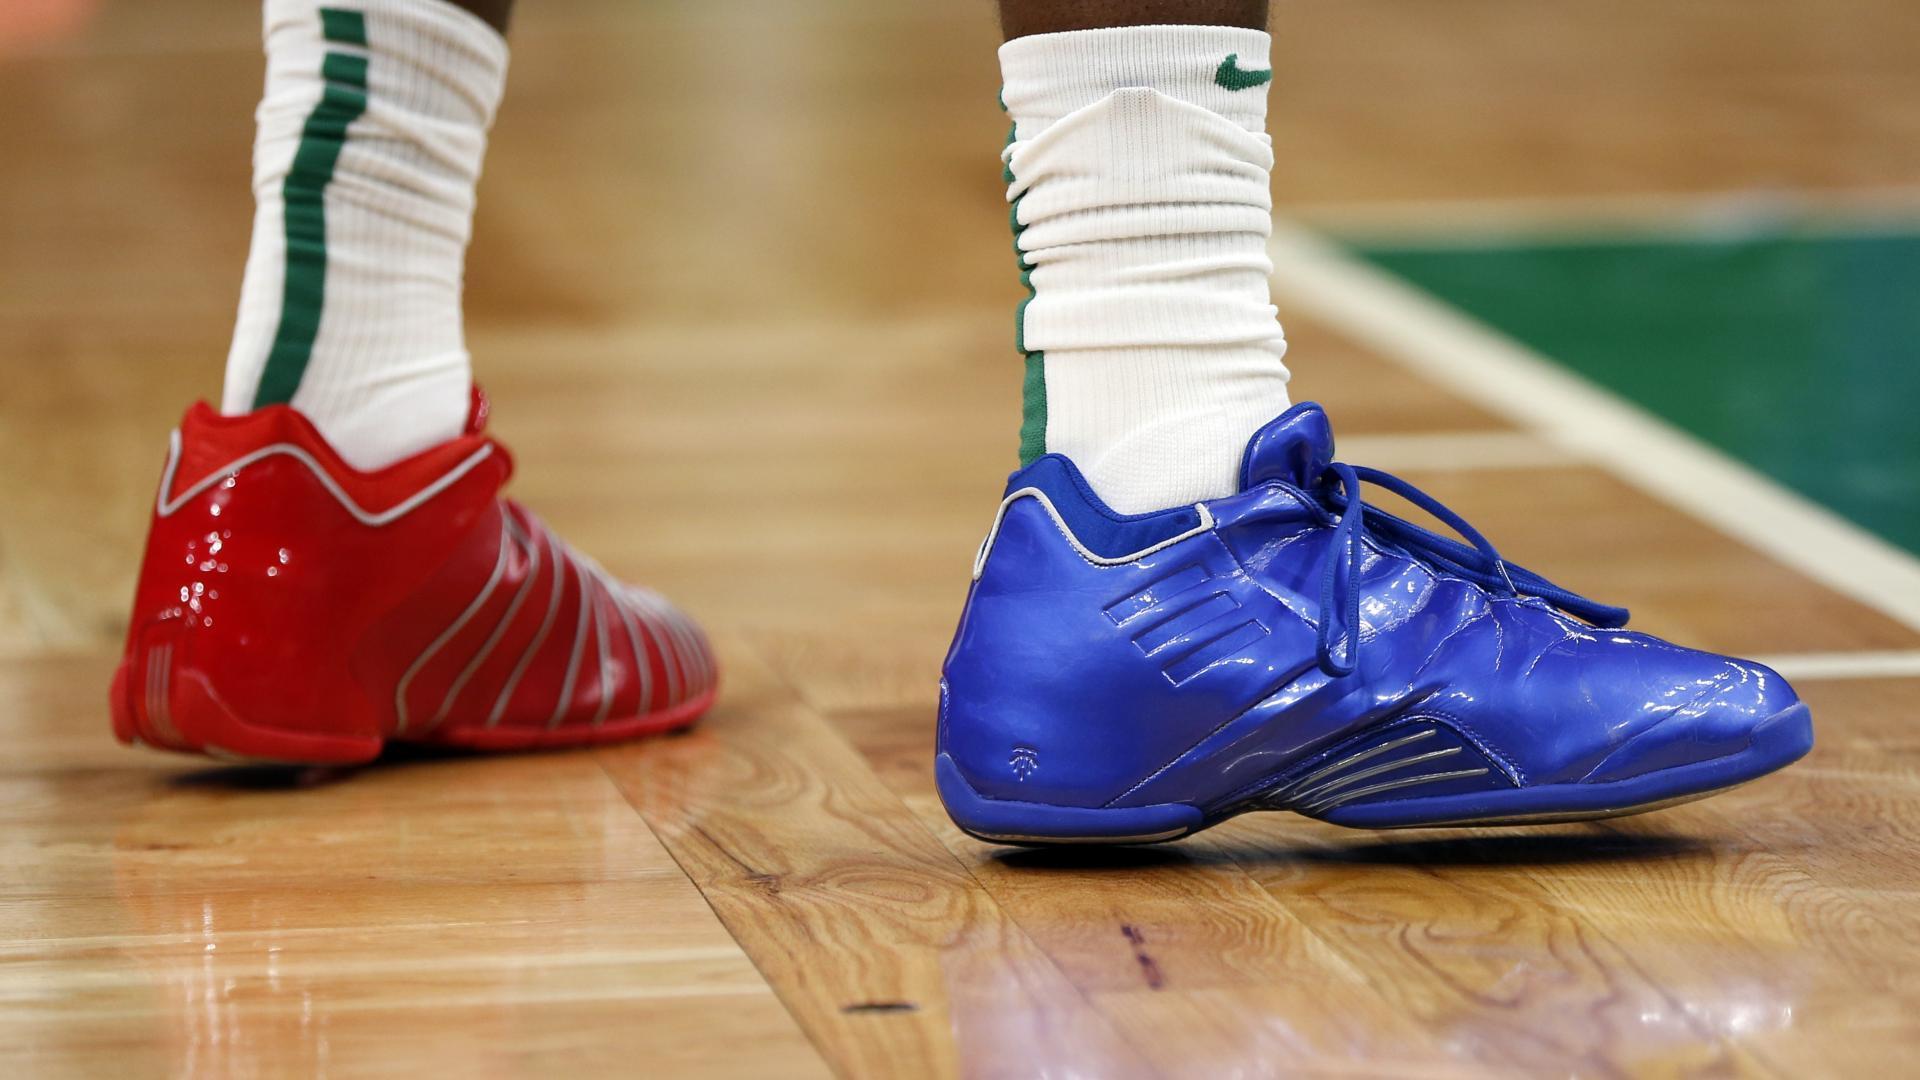 Red and Blue Shoes Logo - About Last Night: Let the games begin | NBA.com